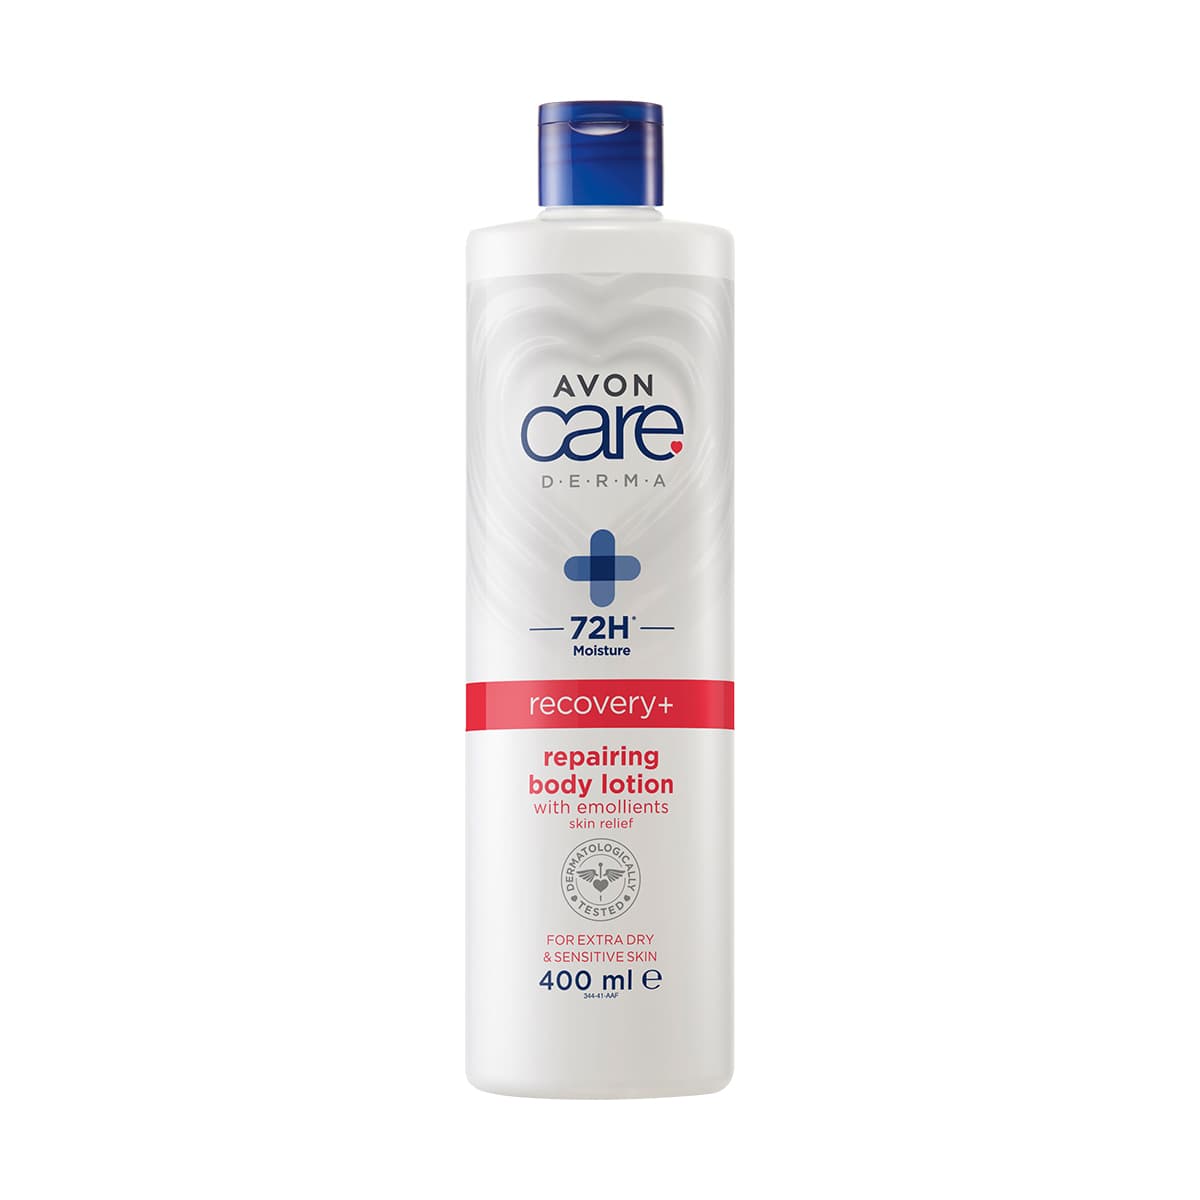 Avon Care Derma Recovery+ Lotion pour le Corps 400ml